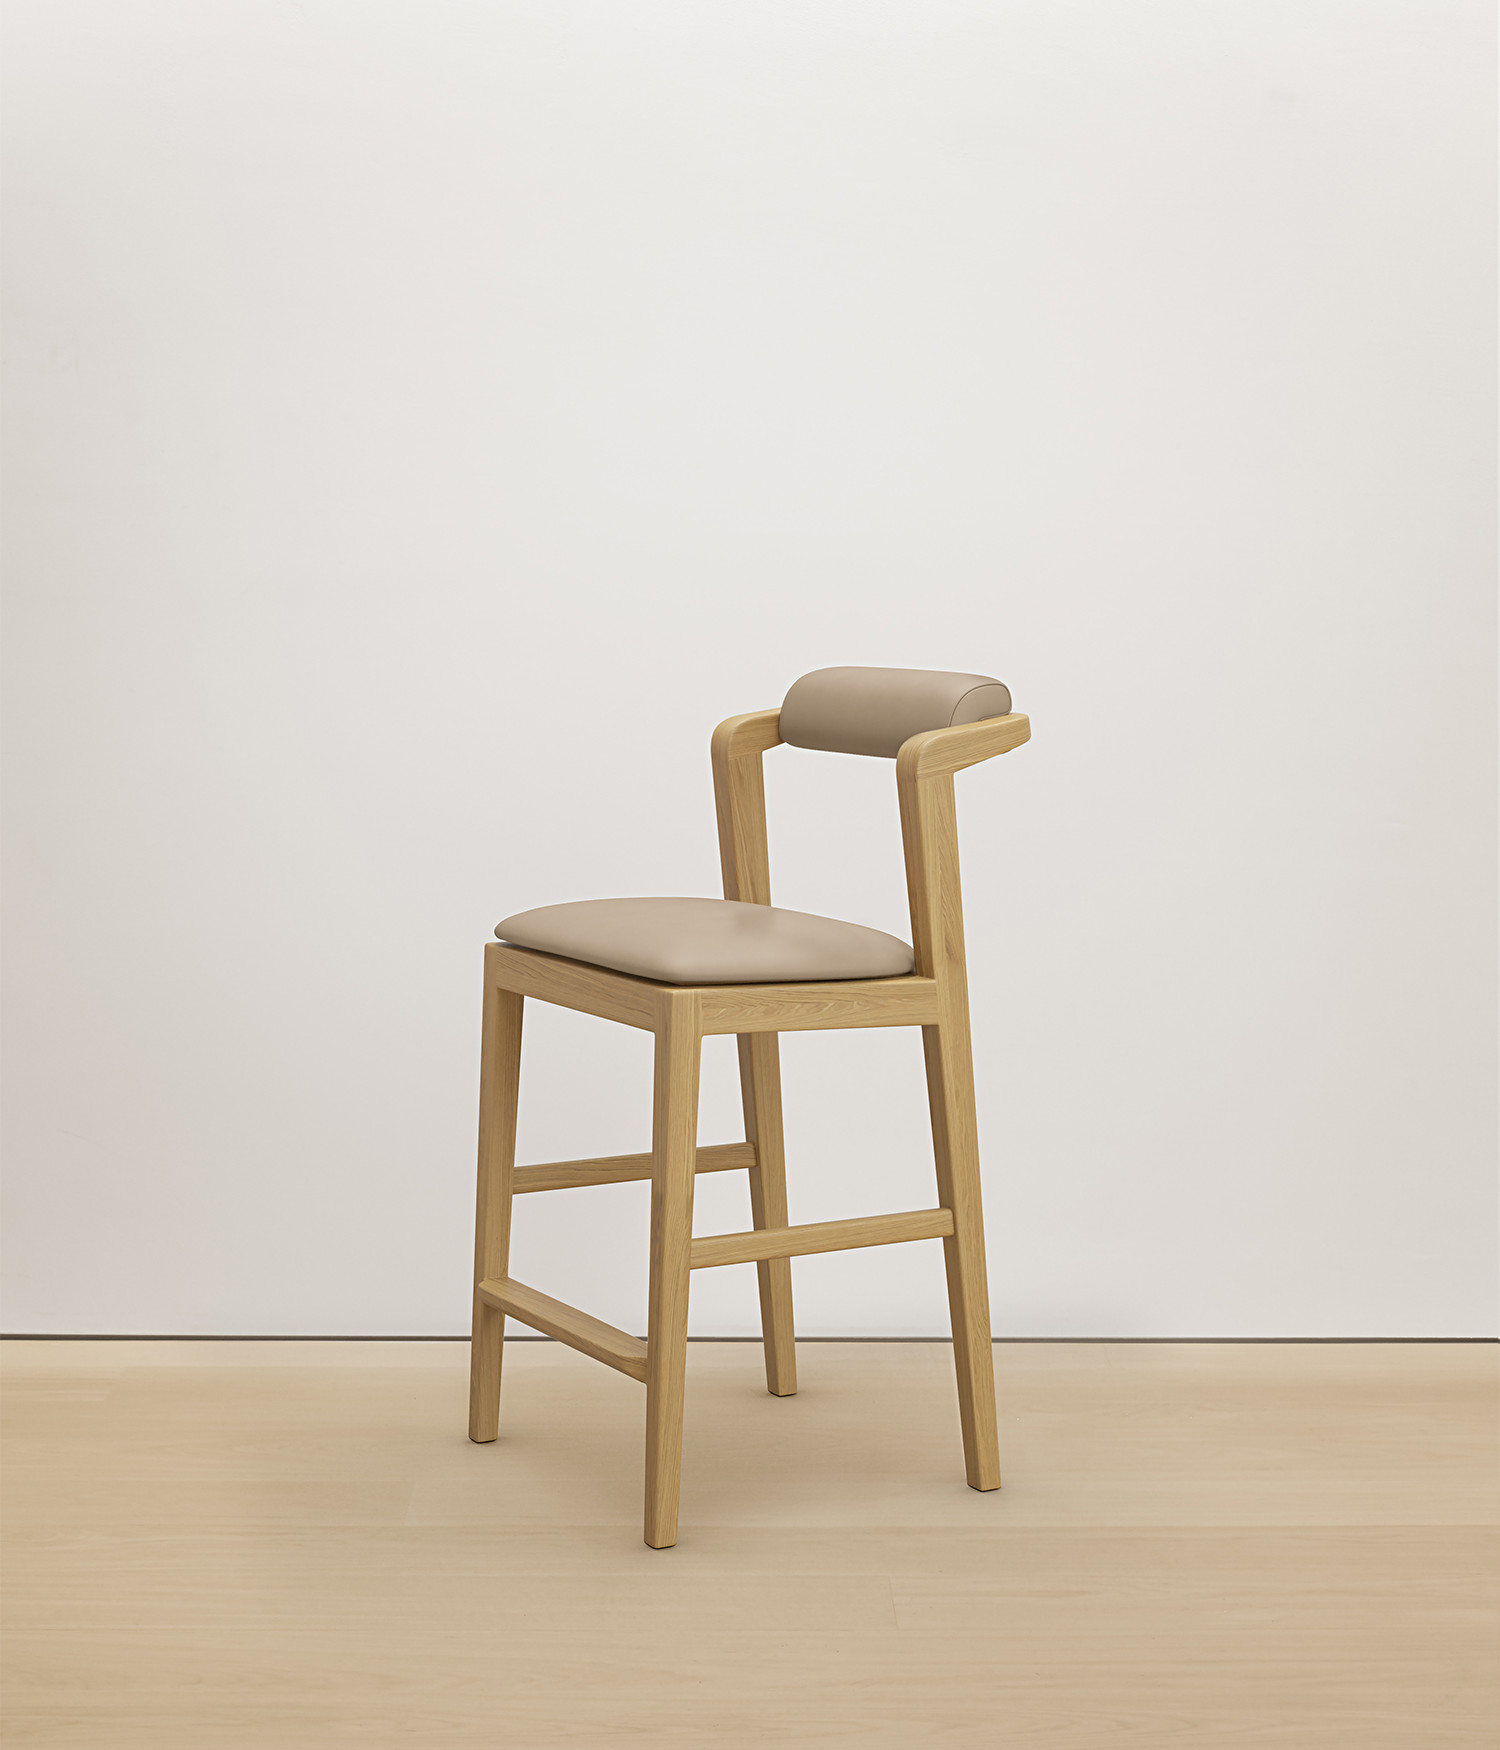  white-oak stool with cream color upholstered seat